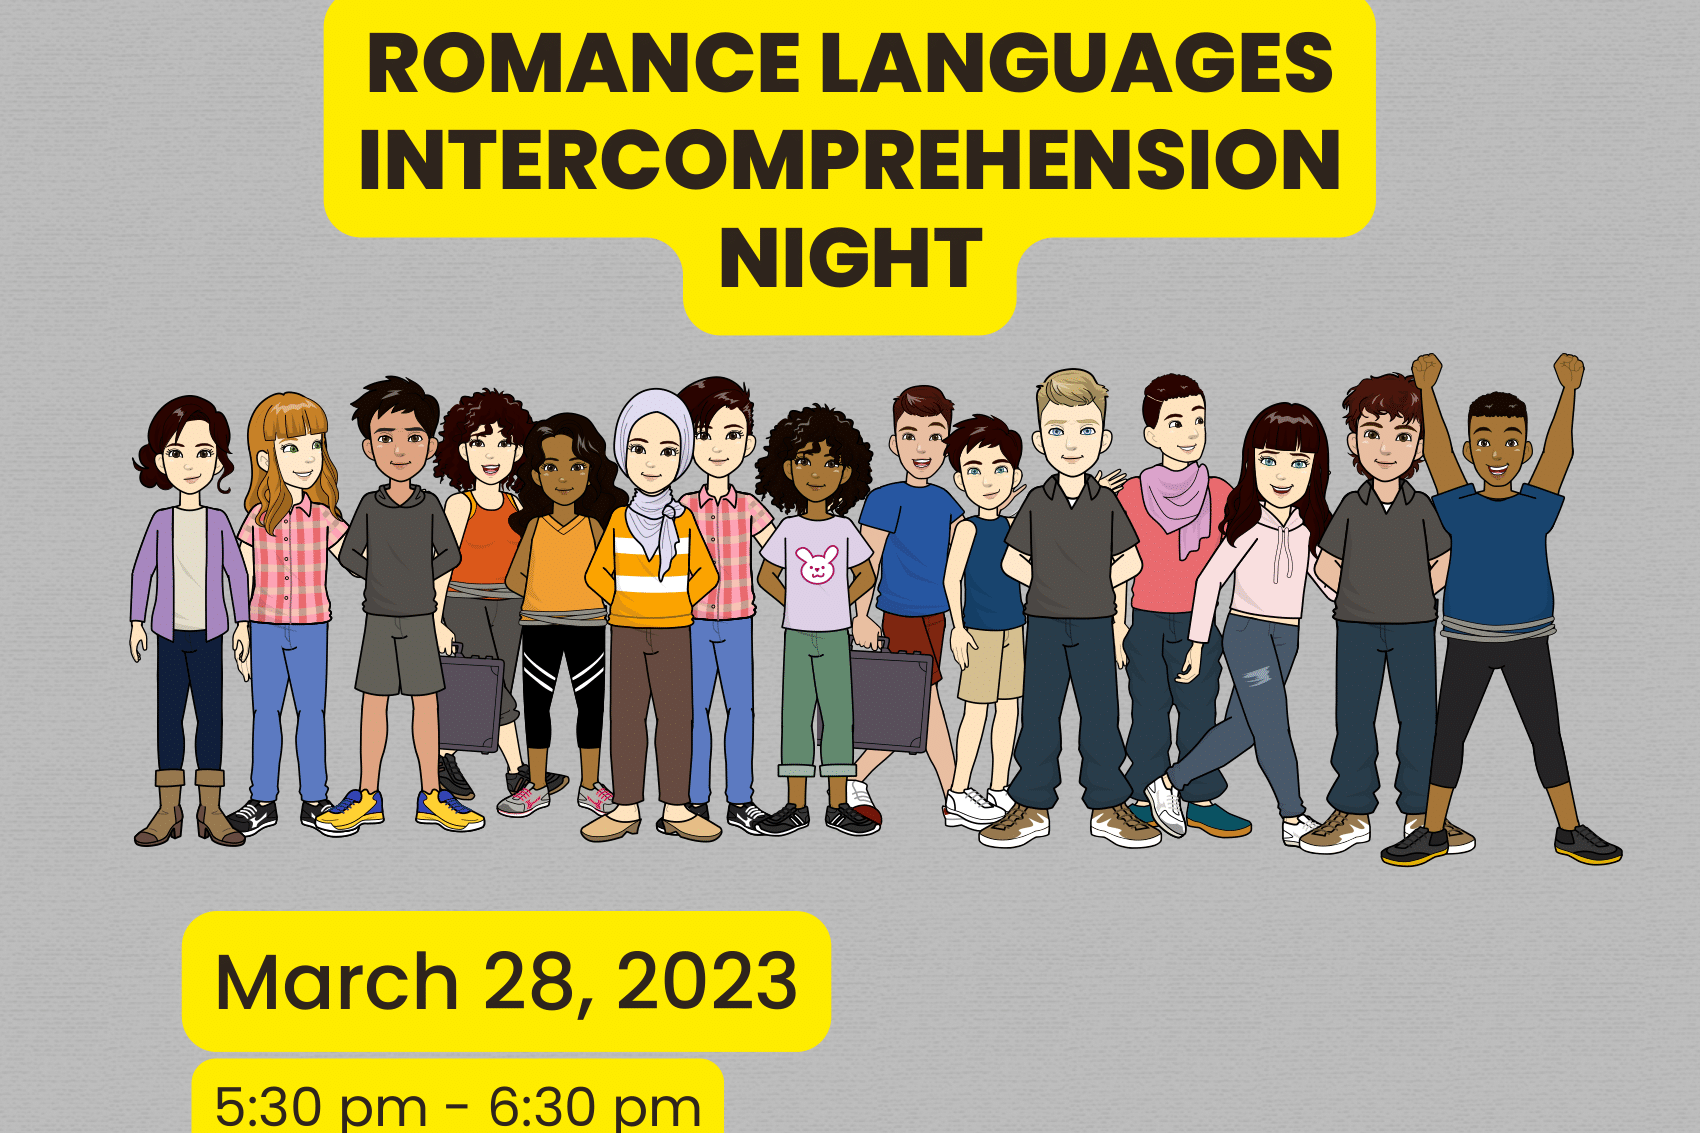 Flyer for Romance Languages Intercomprehension night with a group of people and the event date of March 28, 2023